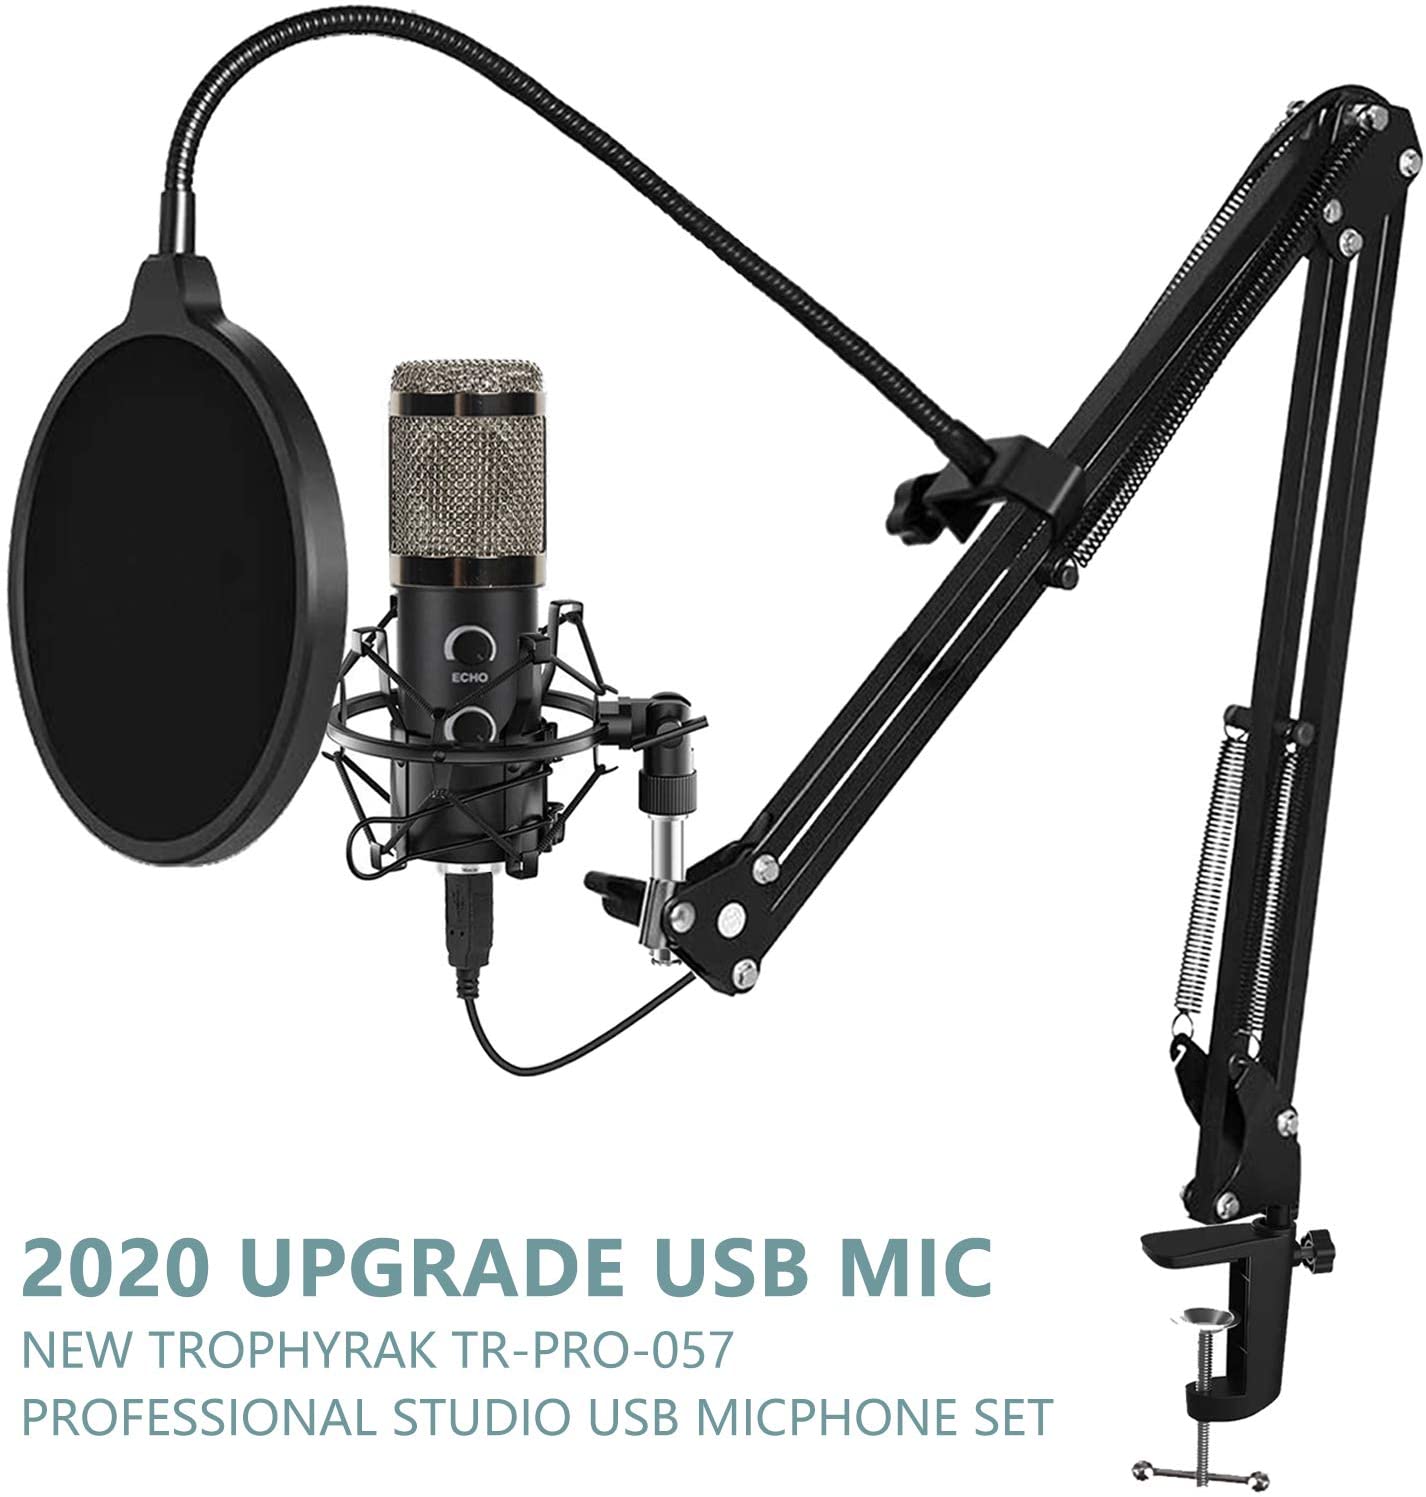 2023 Upgraded USB Microphone for Computer, Mic for Gaming, Podcast, Live Streaming, YouTube on PC, Mic Studio Bundle with Adjustment Arm Stand.